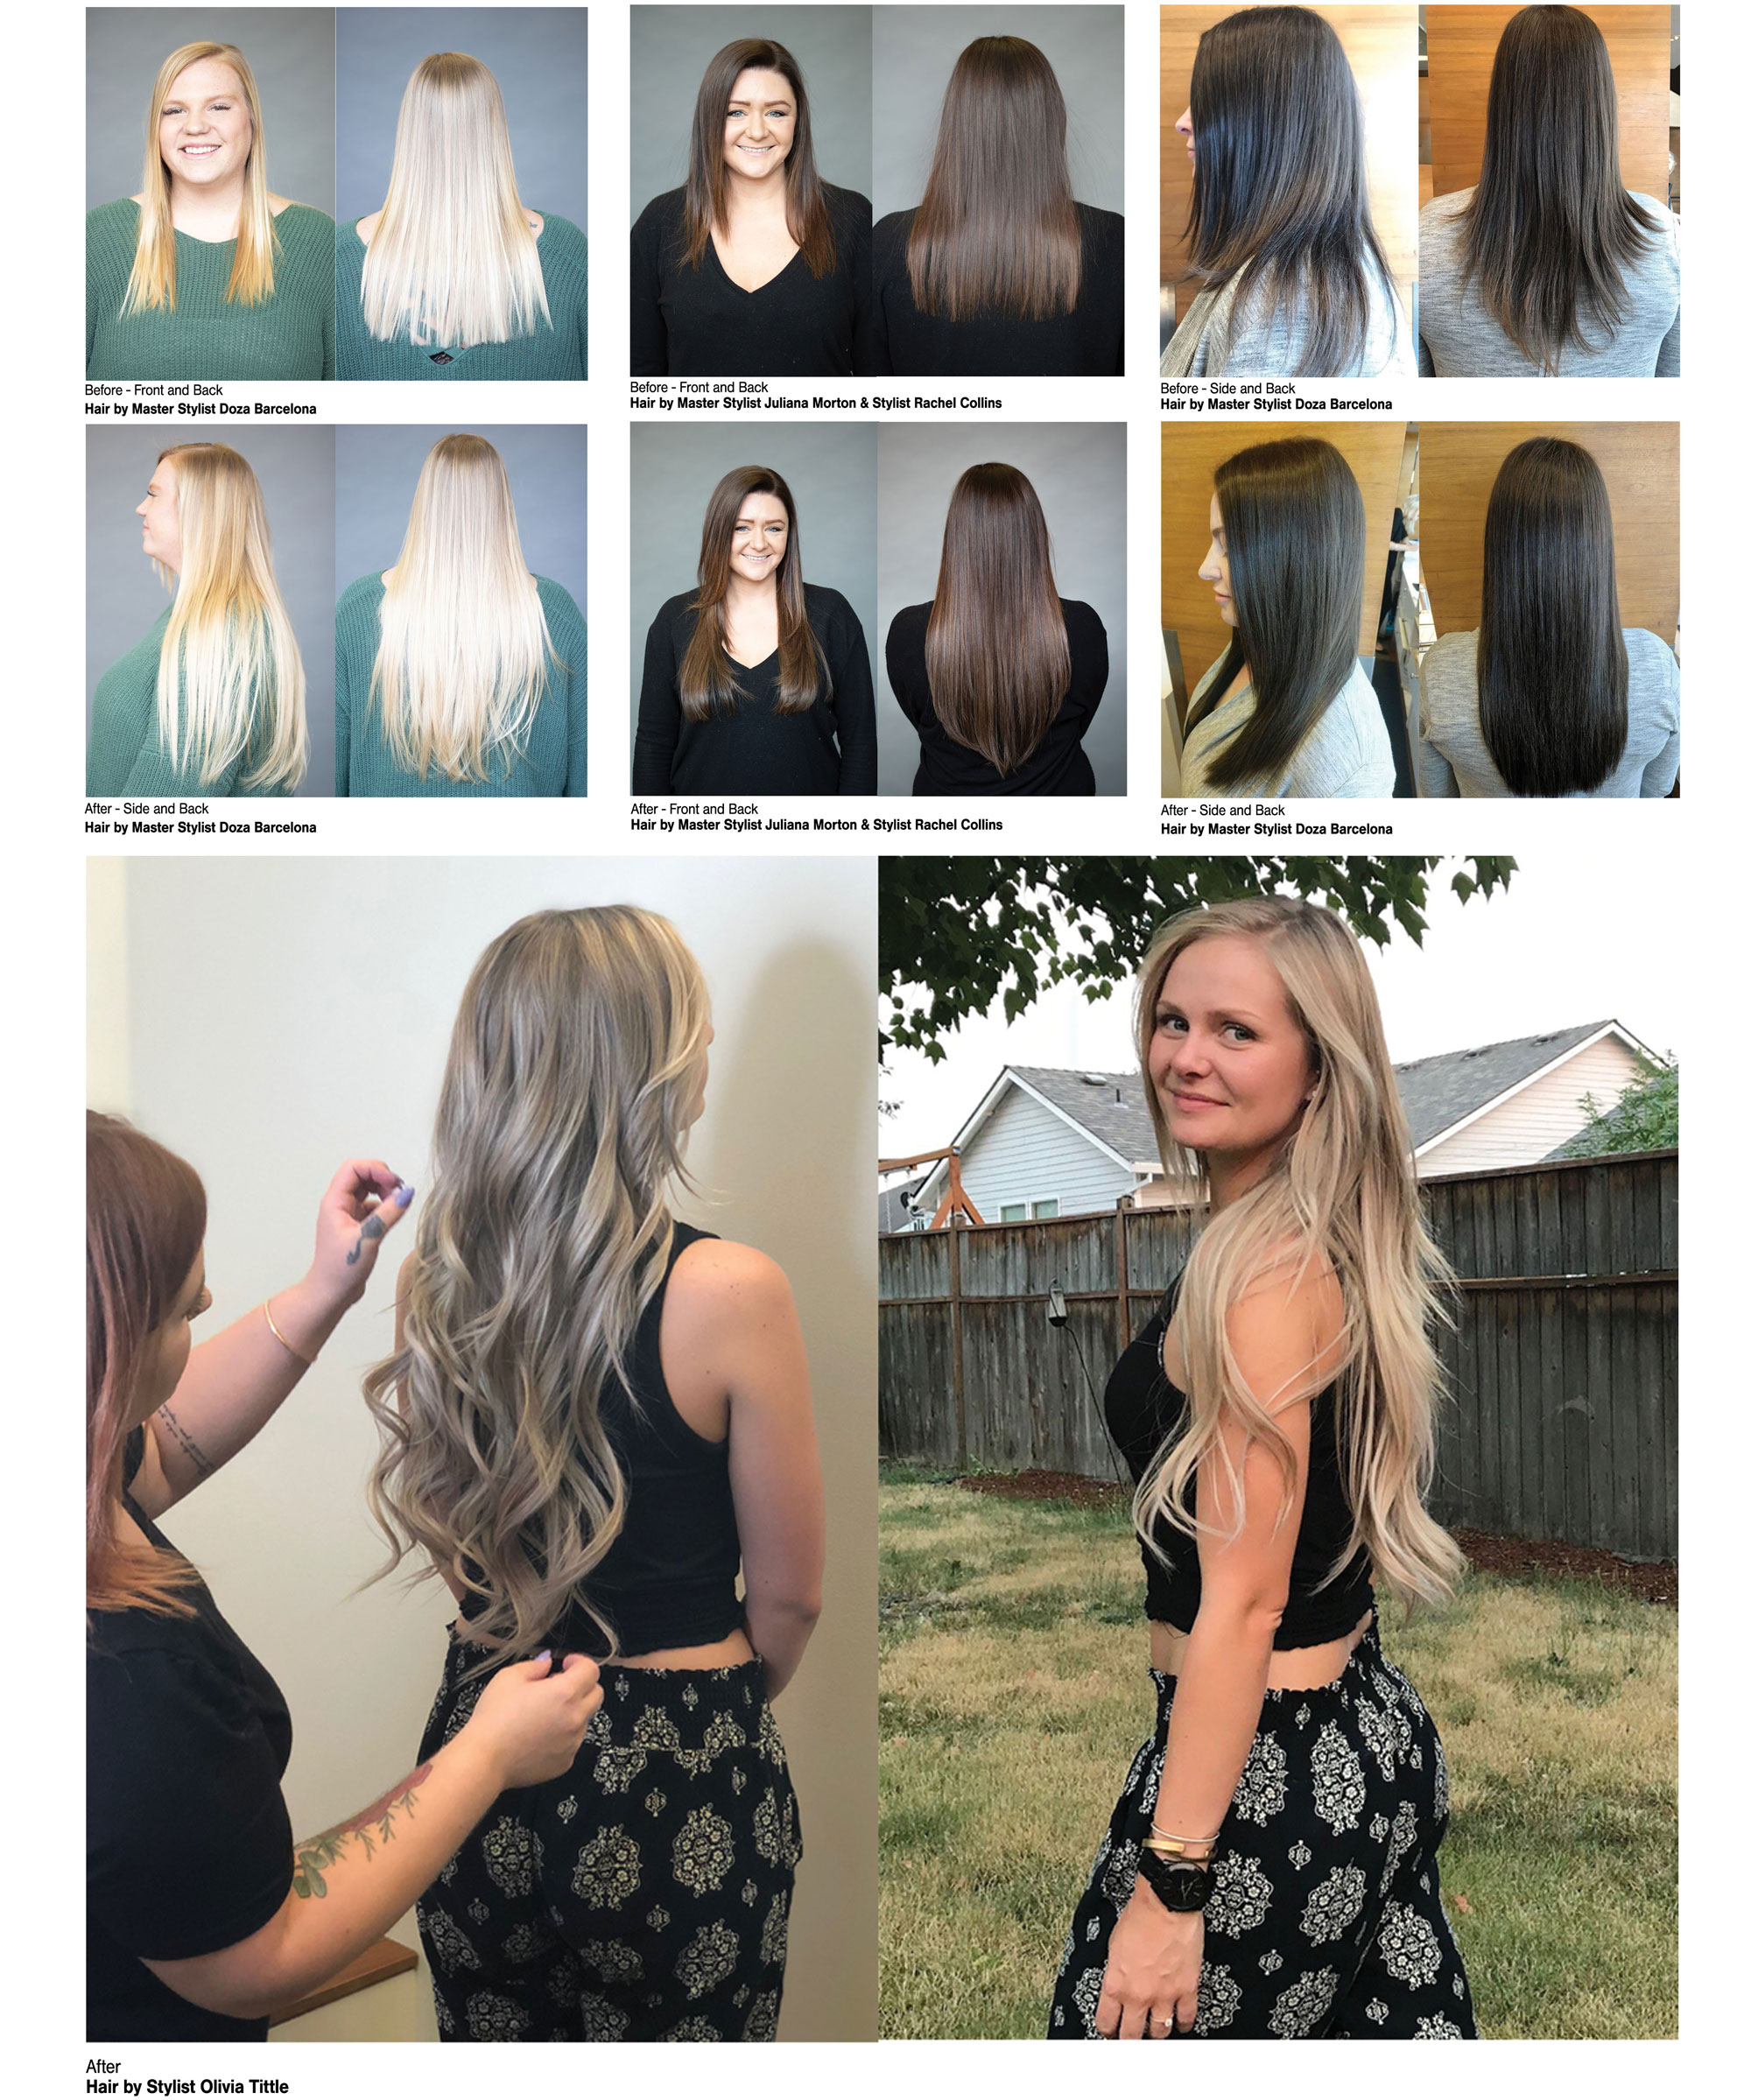 Dosha Salon Spa - VoMor™ Hair Extensions See Our Work